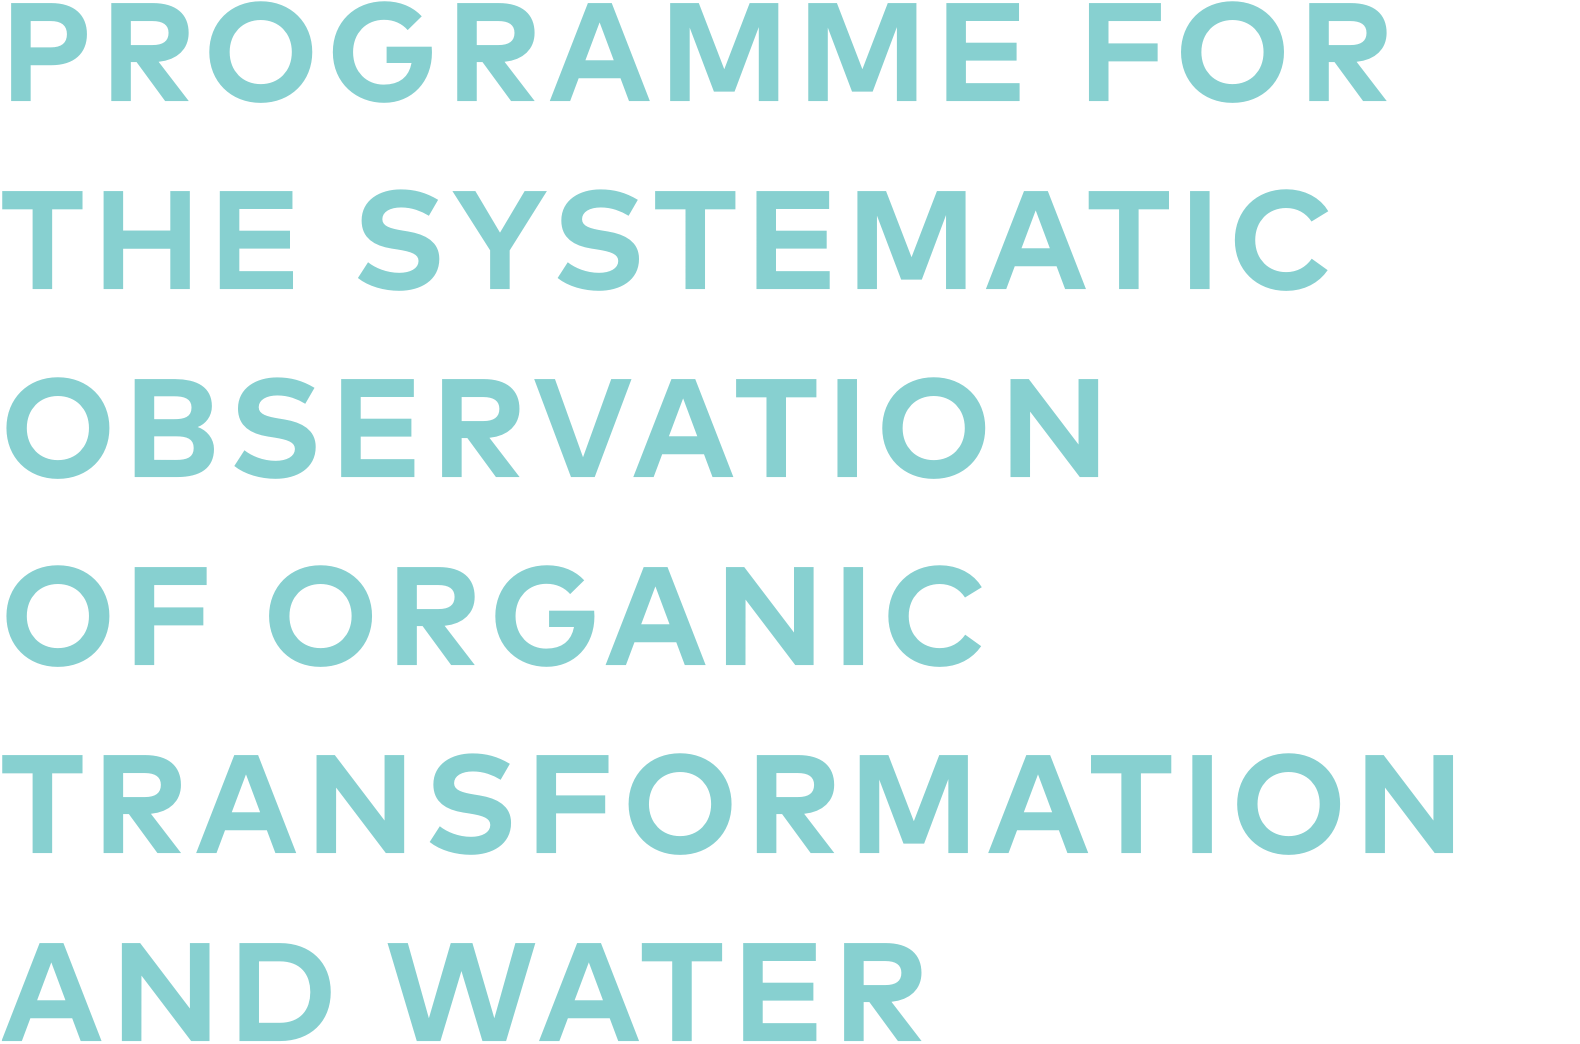 Programme for the Systematic Observation of Organic Transformation and Water